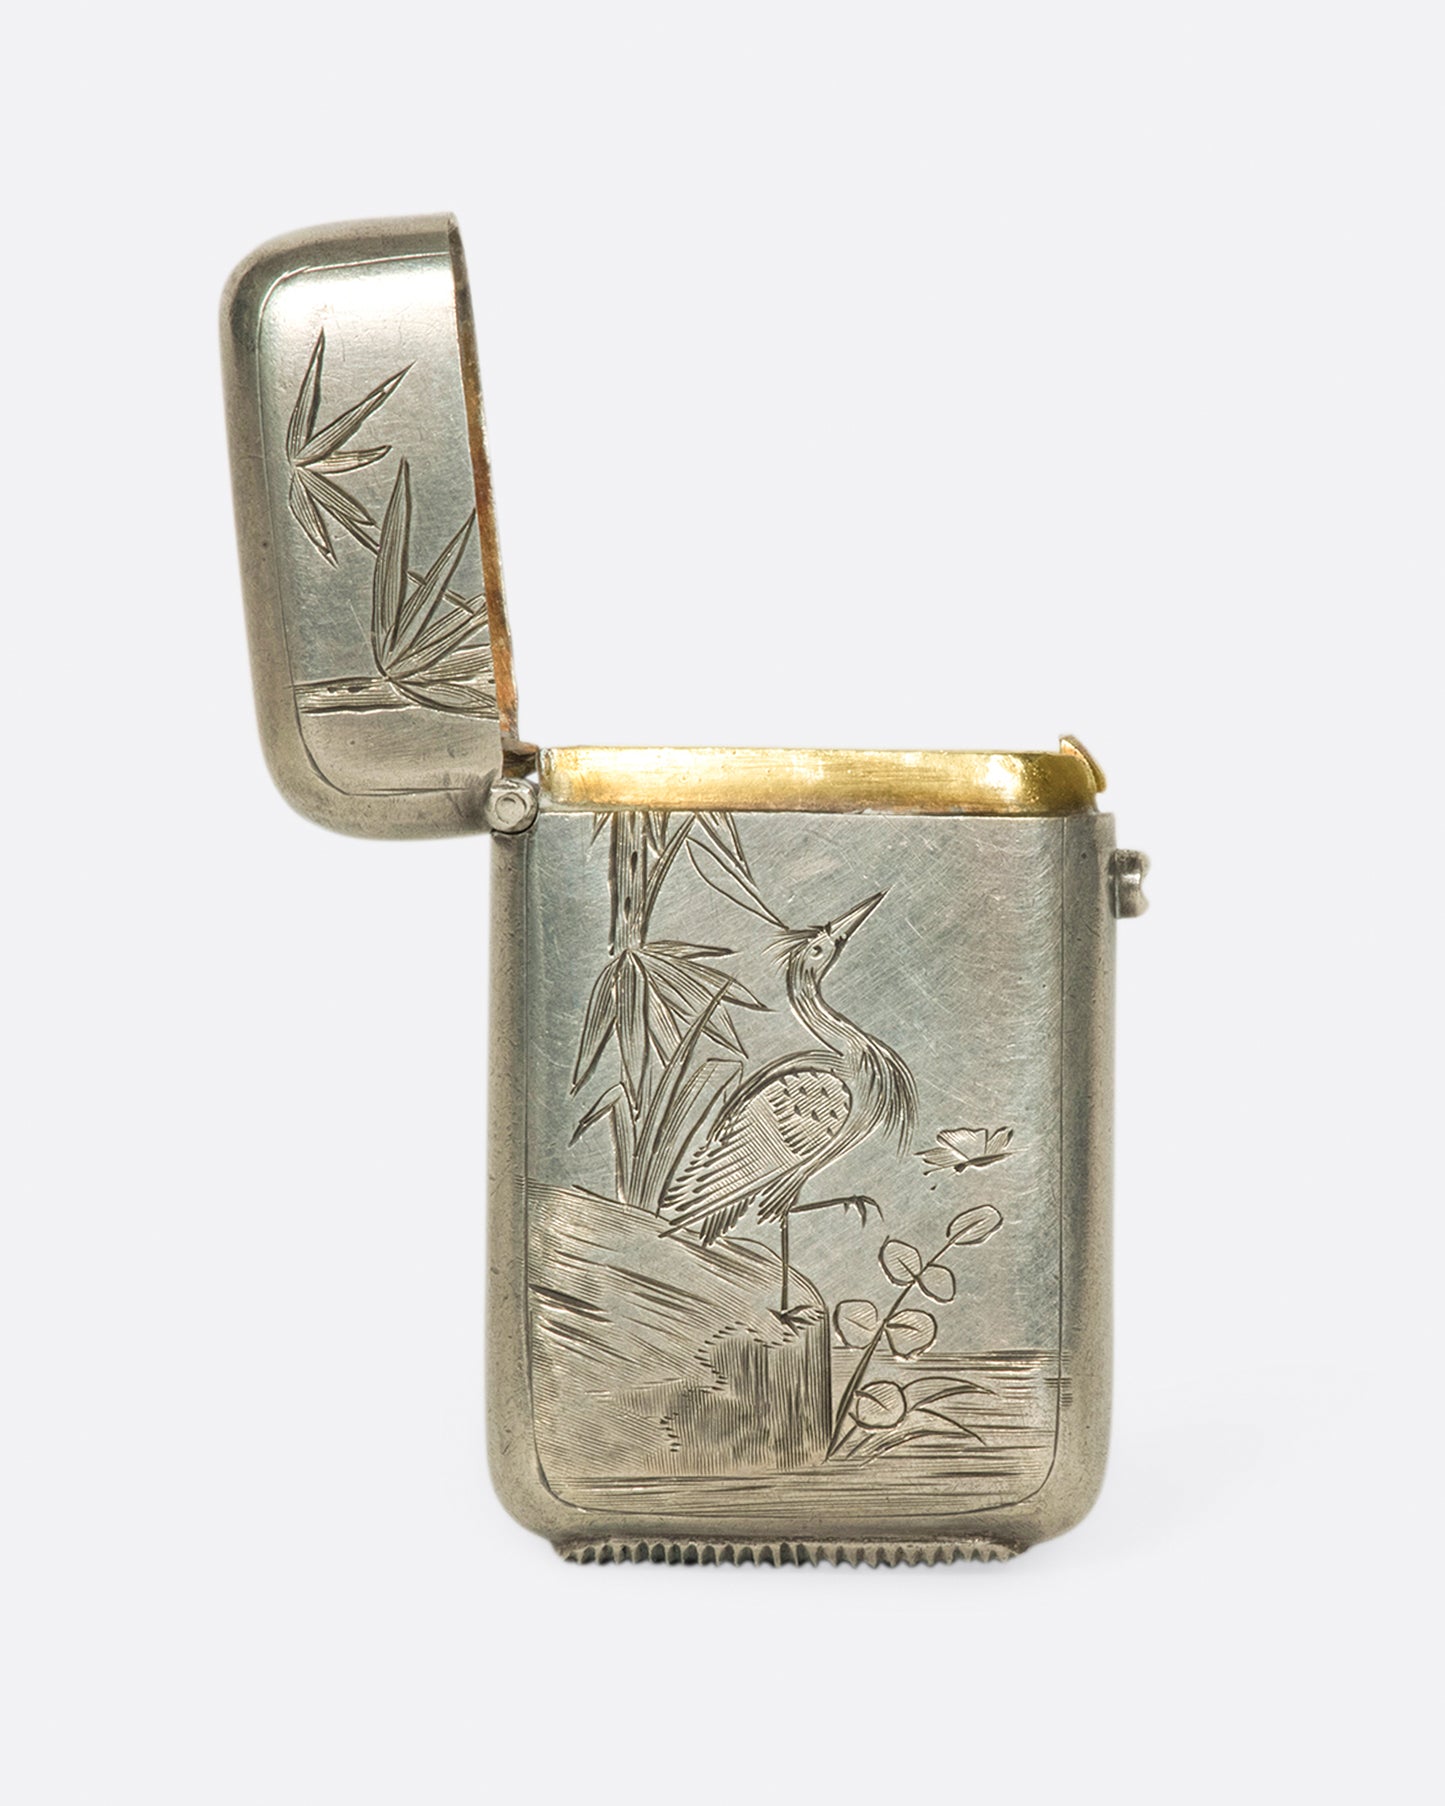 A pocket sized stash box with a hand etched crane, dating back to 1879 Birmingham, England.